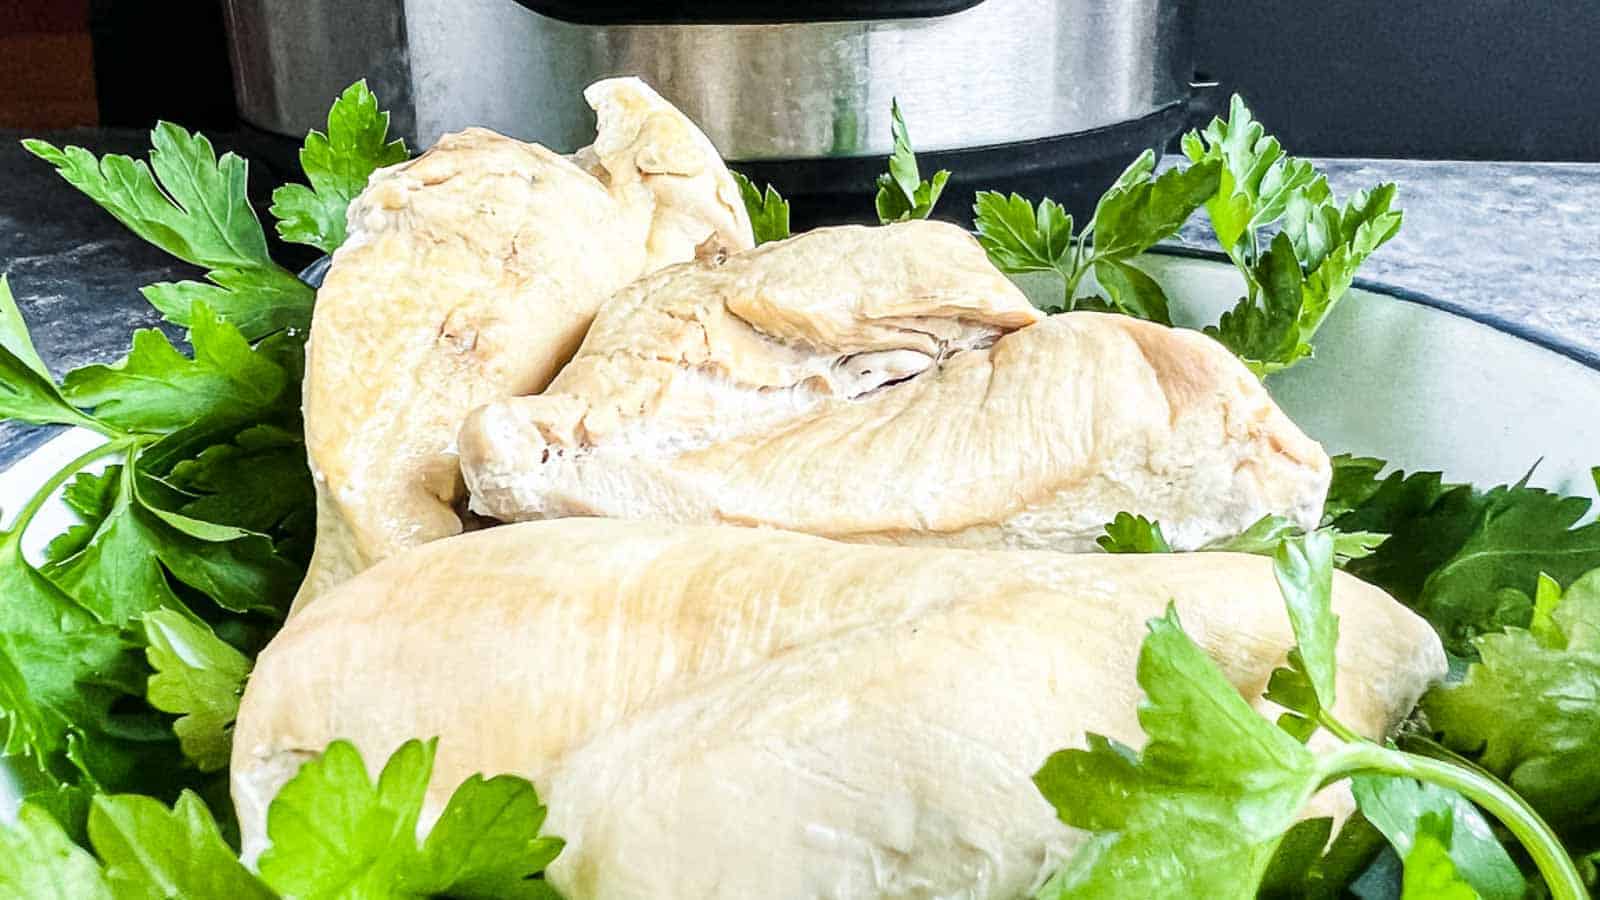 Cooked Frozen Chicken on a plate with herbs and Instant Pot behind.